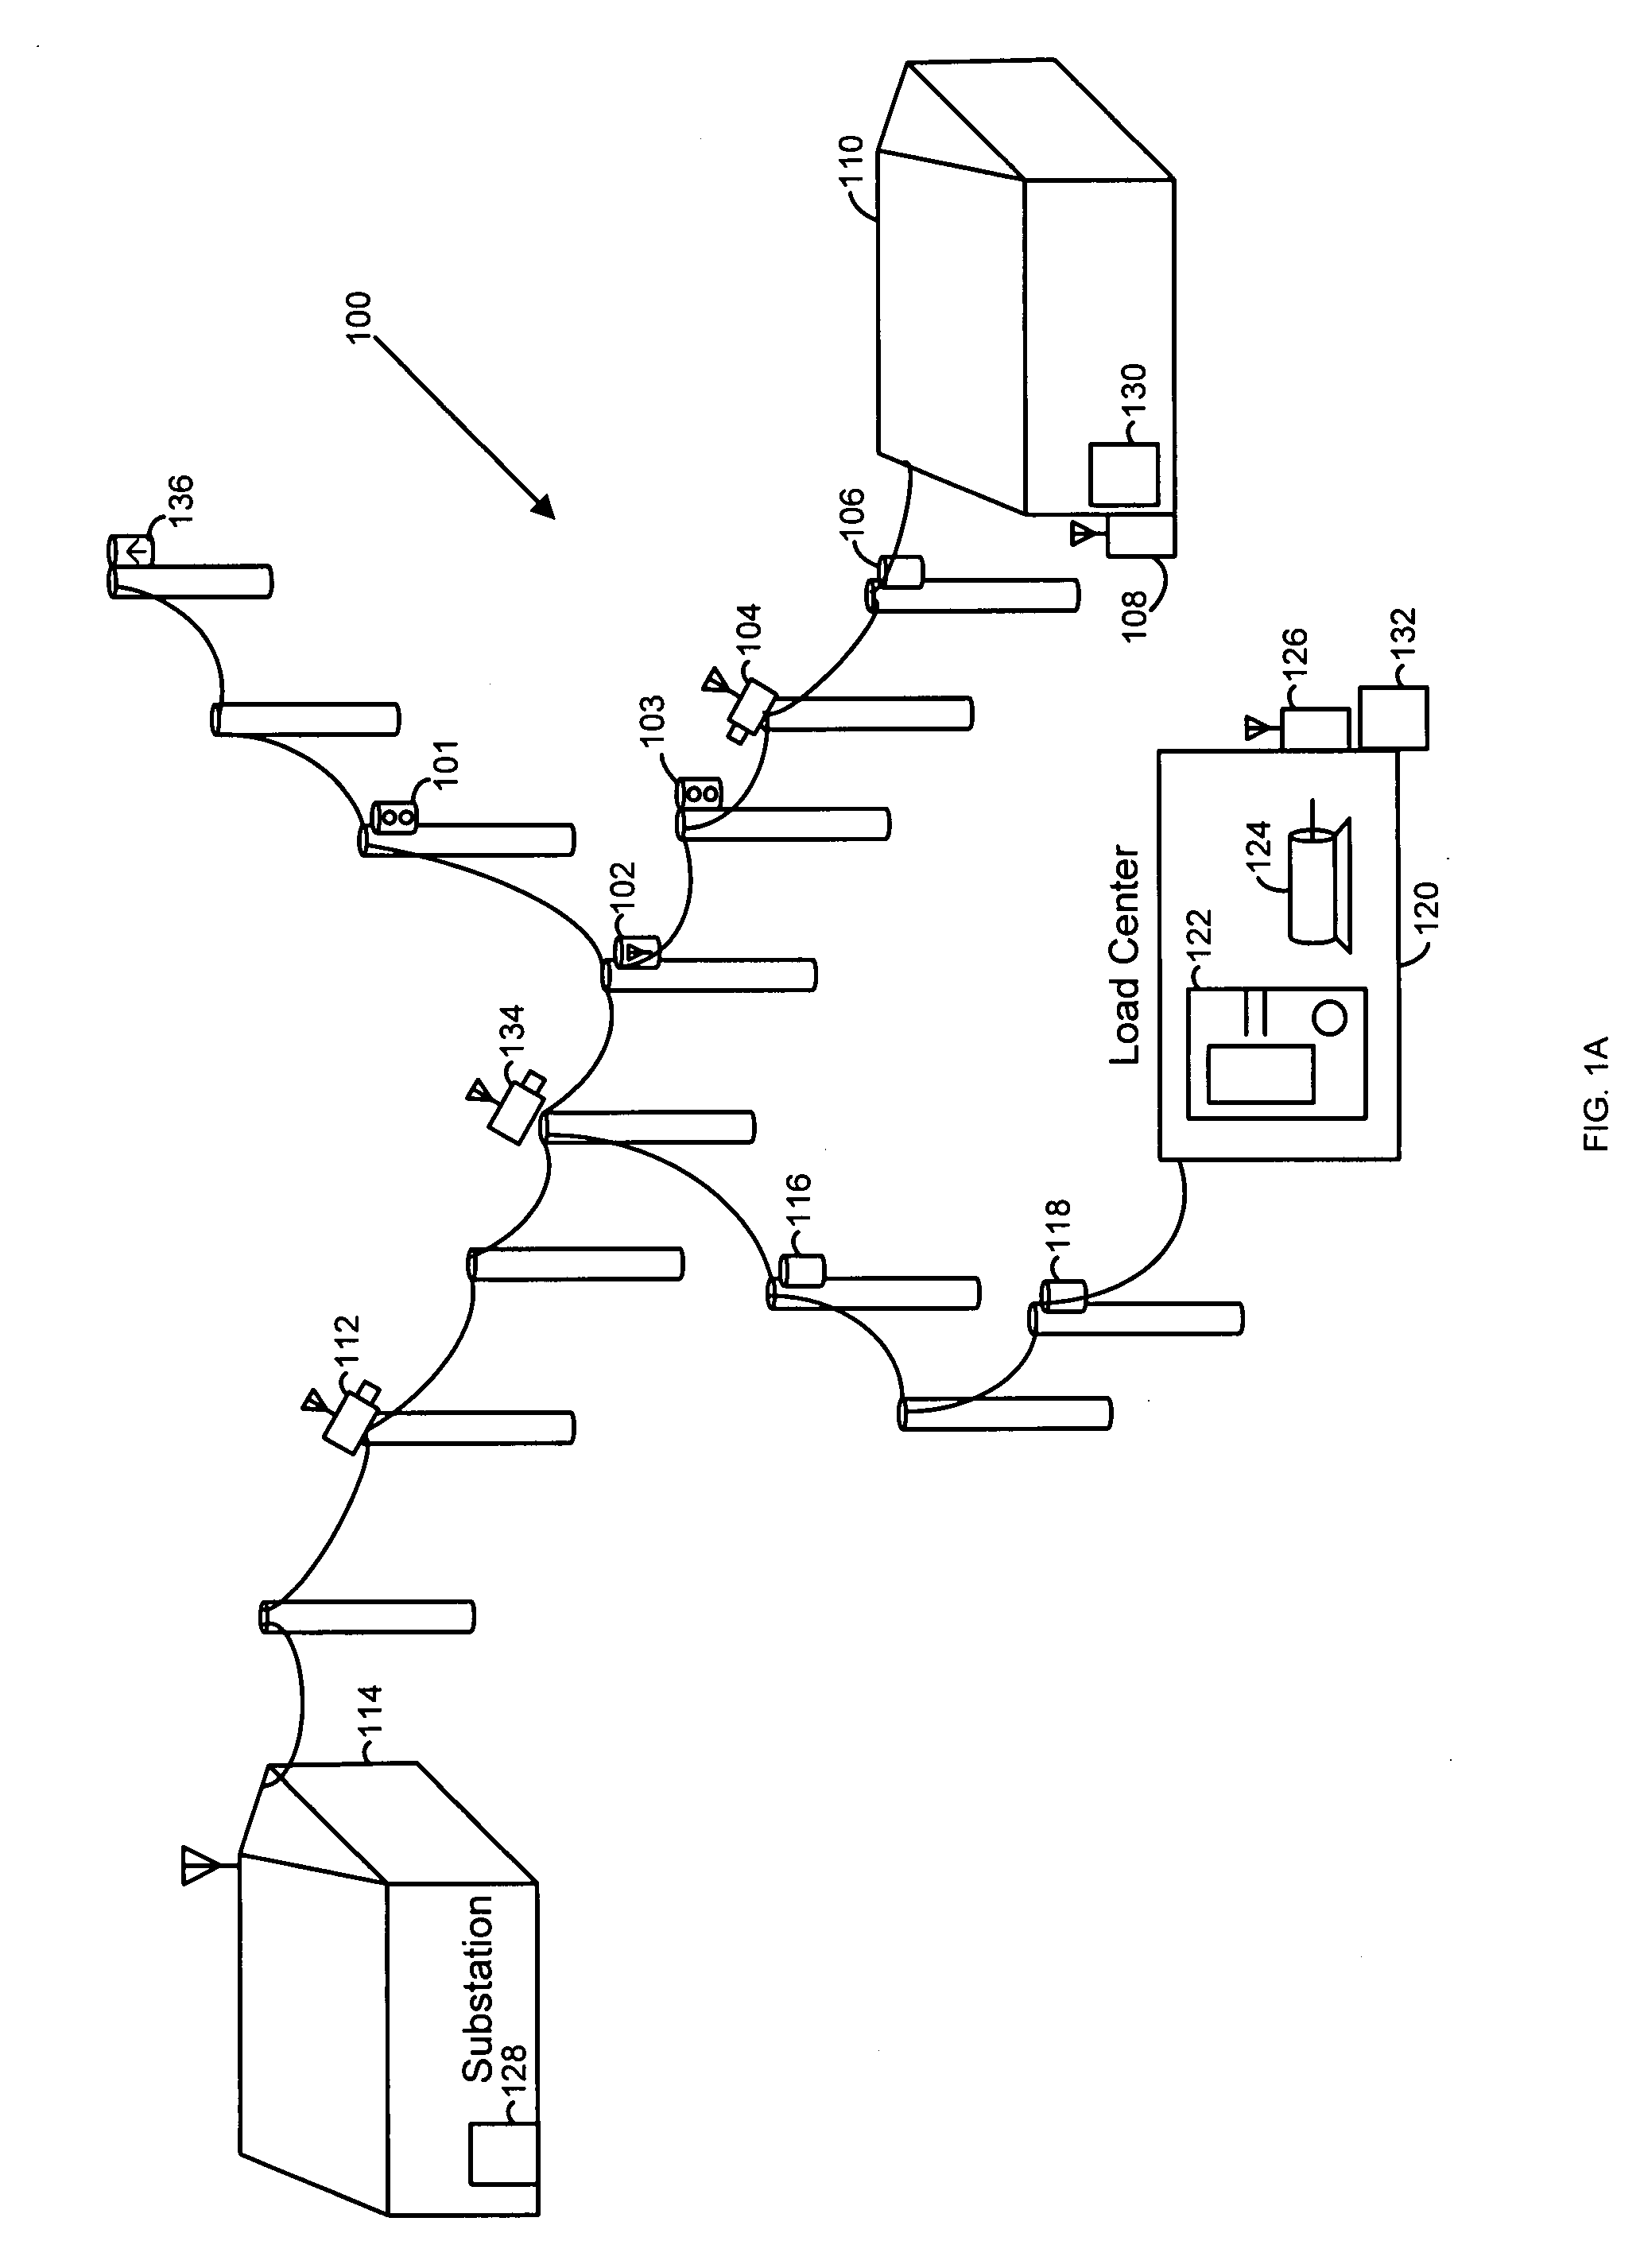 Systems and methods for detecting high-impedance faults in a multi-grounded power distribution system